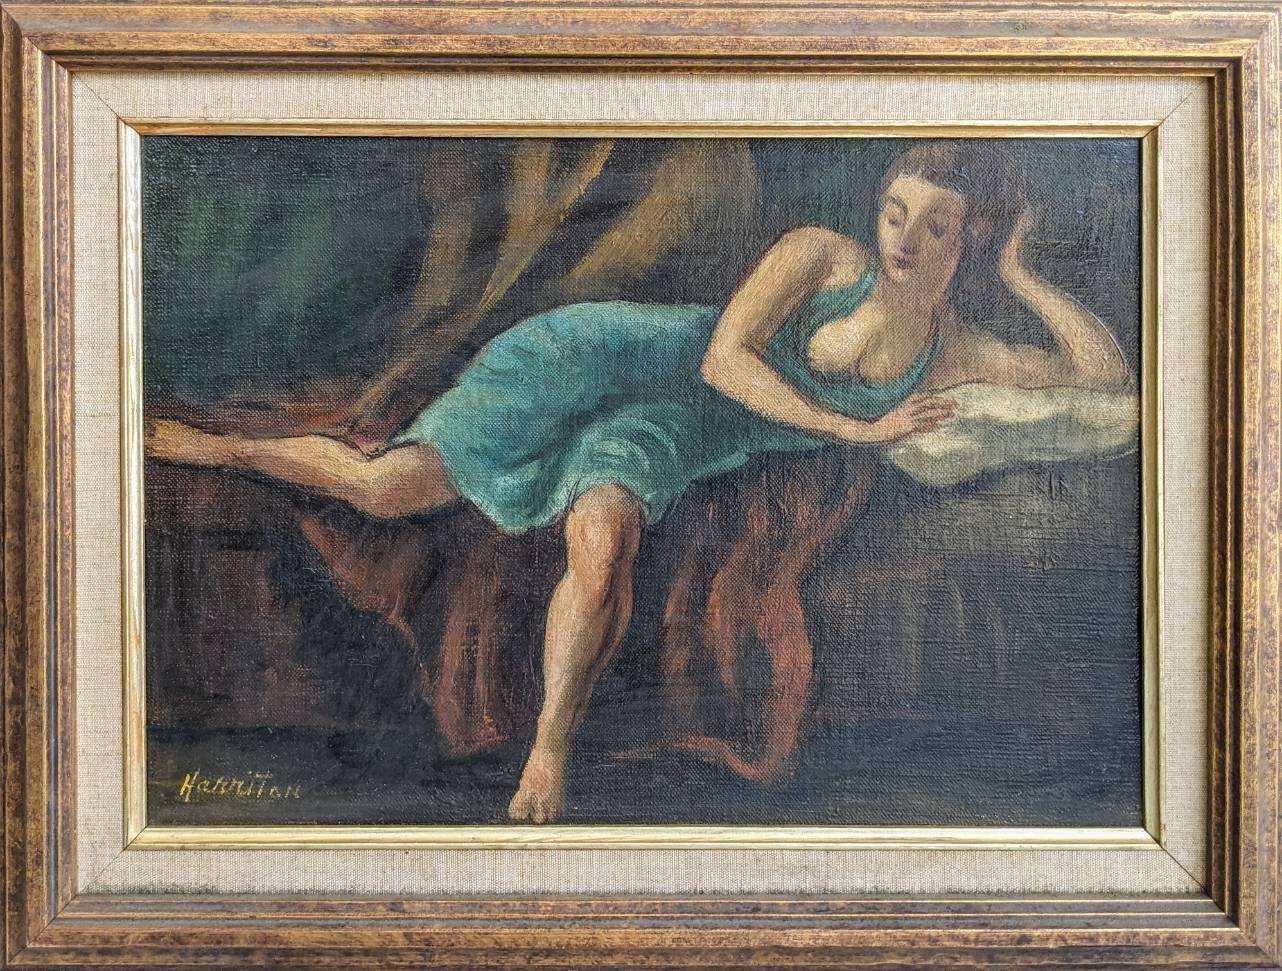 Abraham Harriton (1893 - 1986)
Dancer Resting, 1922
Oil on canvas laid on board
10 x 14 inches
Signed lower left; signed, titled, and dated on the reverse

Provenance:
Private Collection, Nyack, New York

Long-lived painter Abraham Harriton